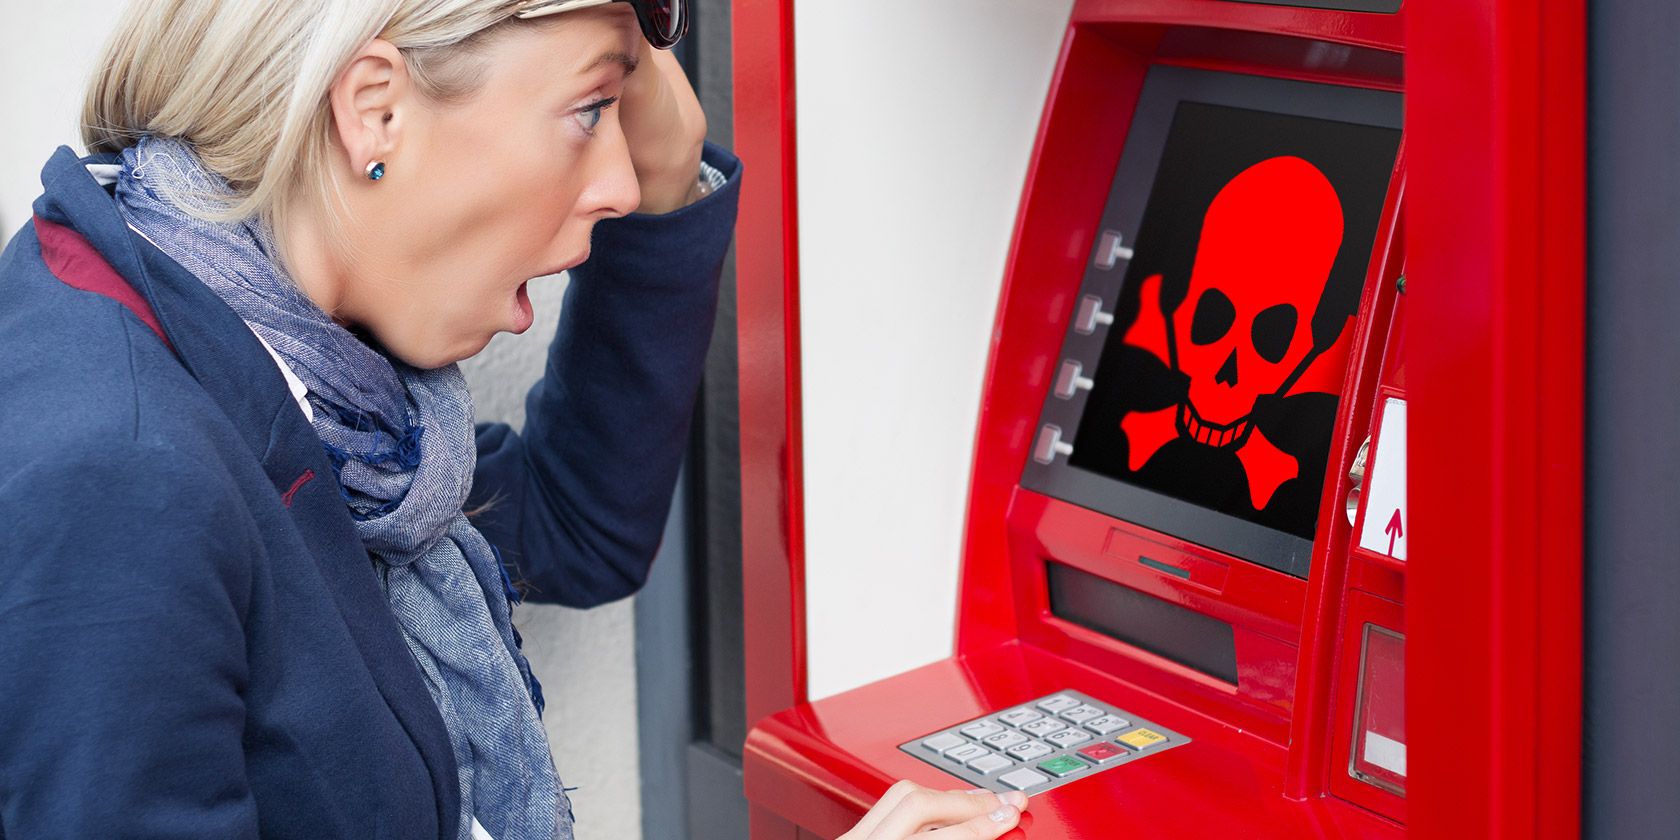 3 Danger Signs to Look for Each Time You Use an ATM